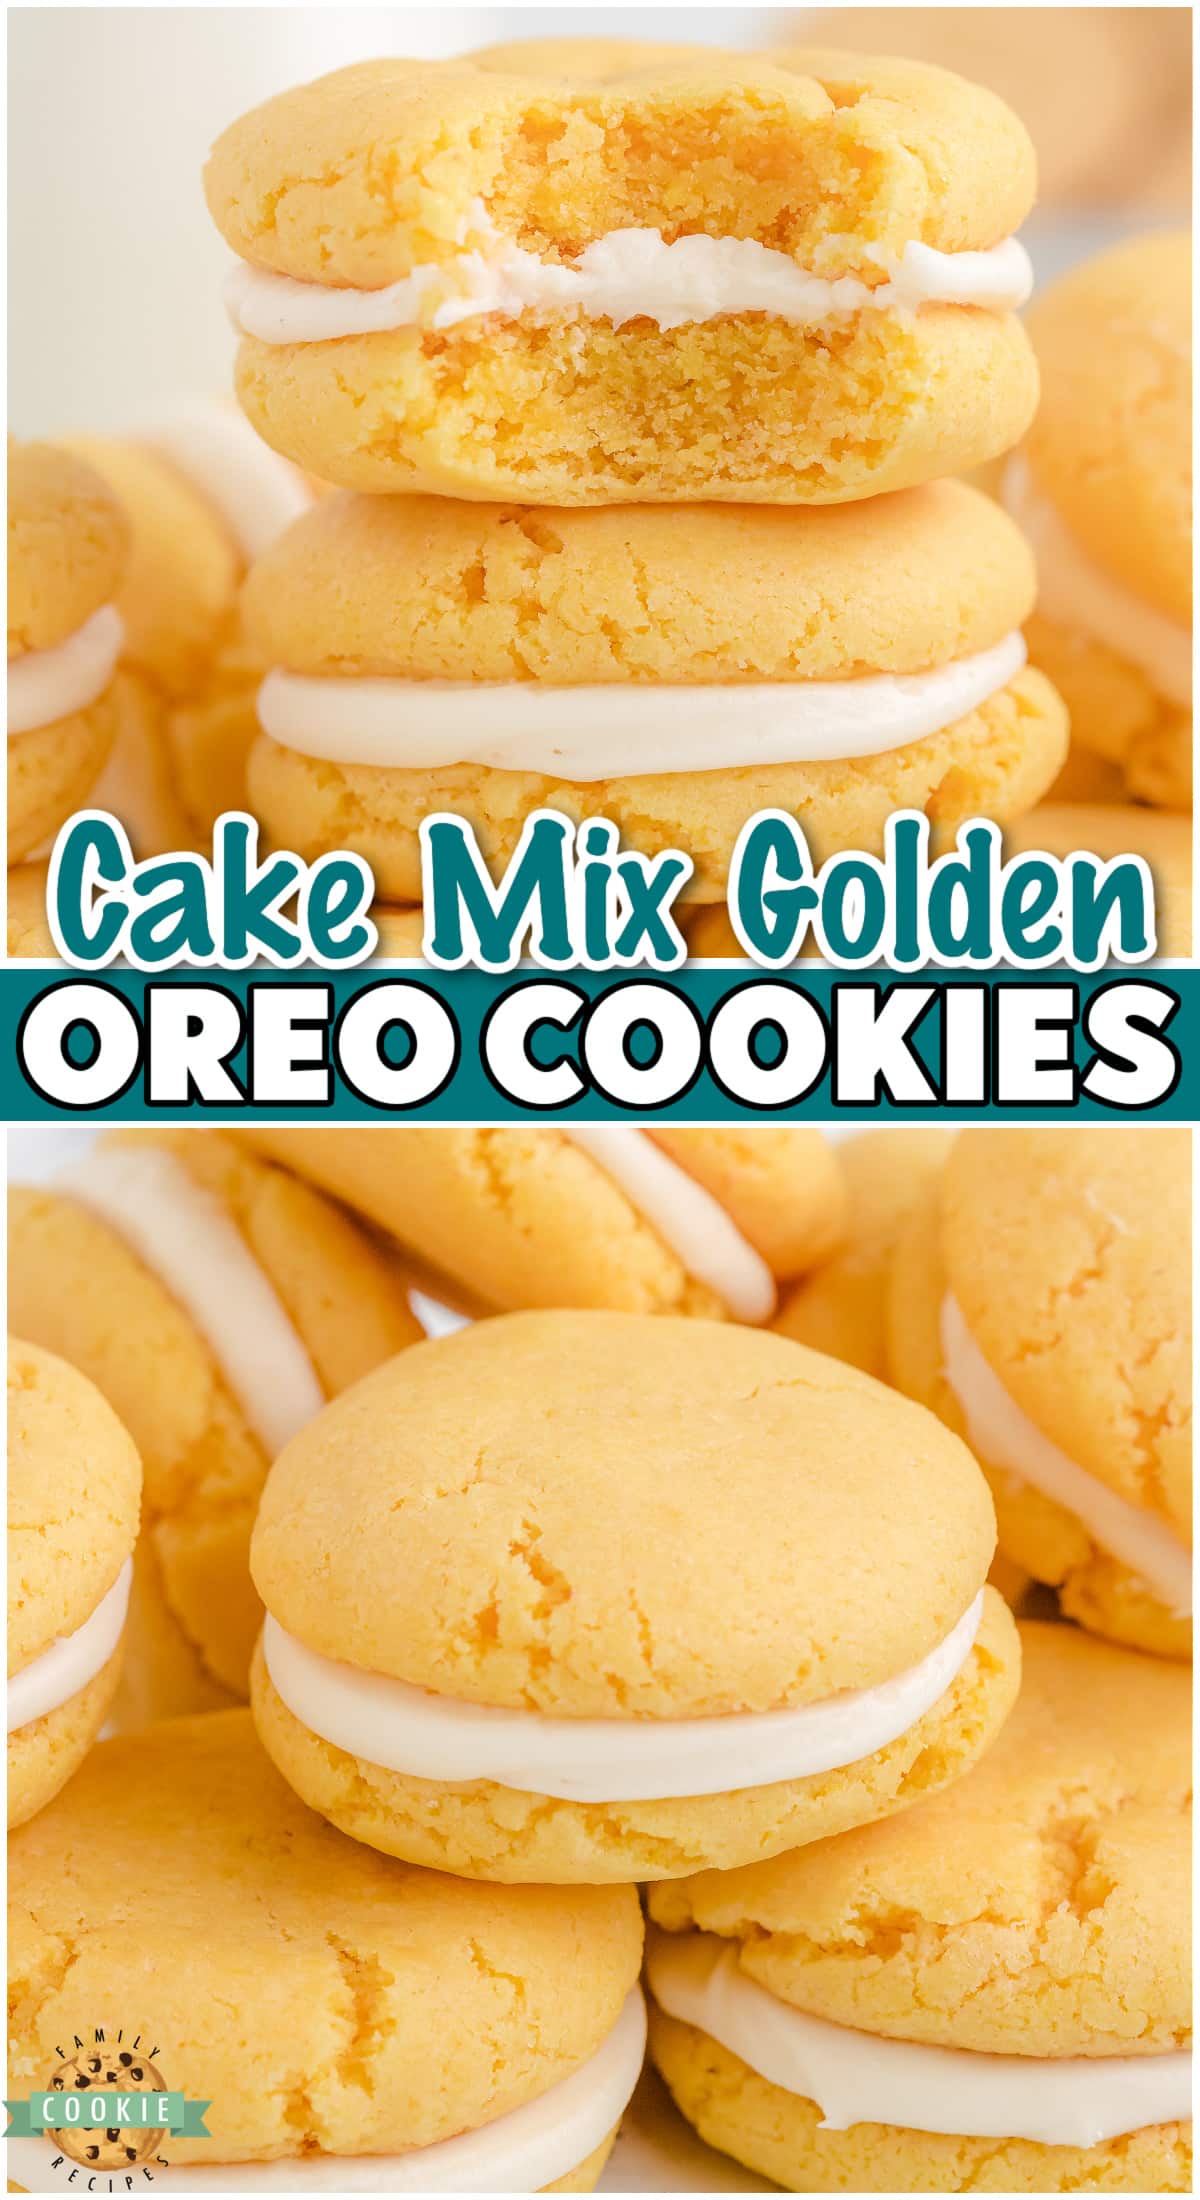 Simple recipe for Homemade Golden Oreo Cookies made with a yellow cake mix! Soft, perfectly sweet sandwich cookies that everyone goes crazy over!